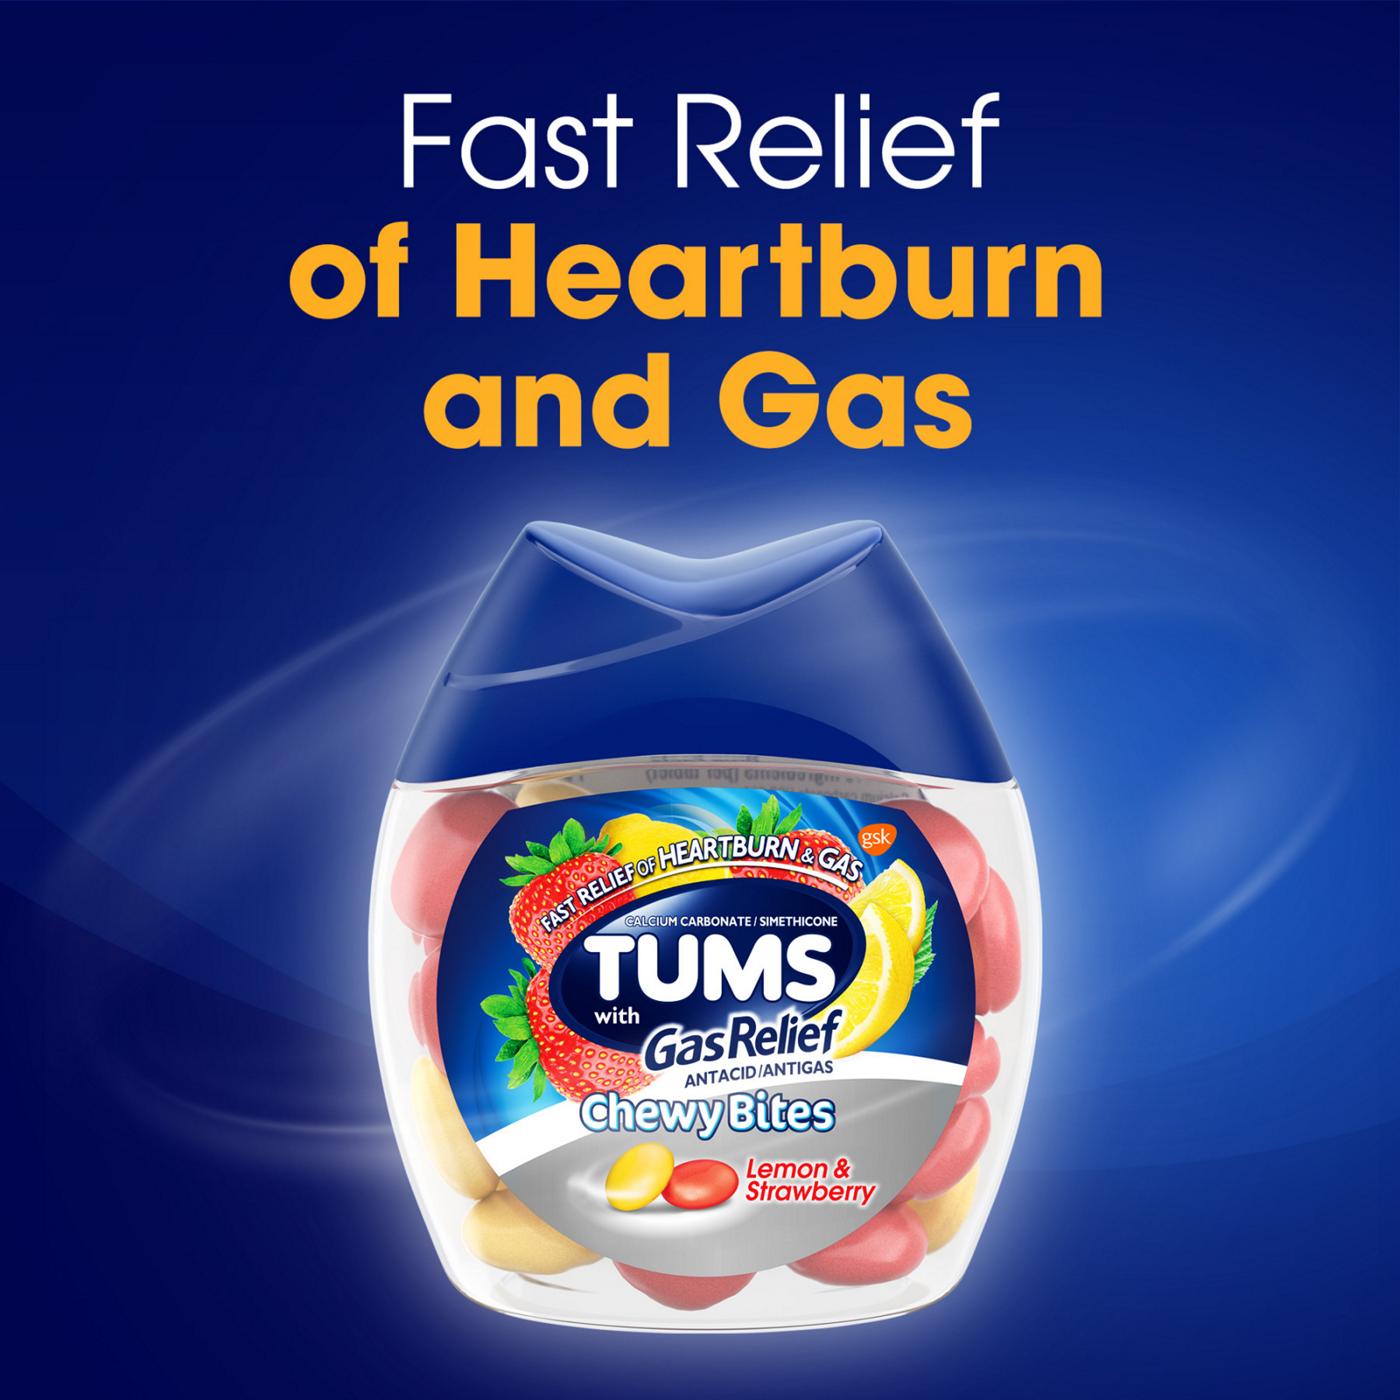 Tums Chewy Bites Lemon and Strawberry Antacid Tablets With Gas Relief; image 6 of 6